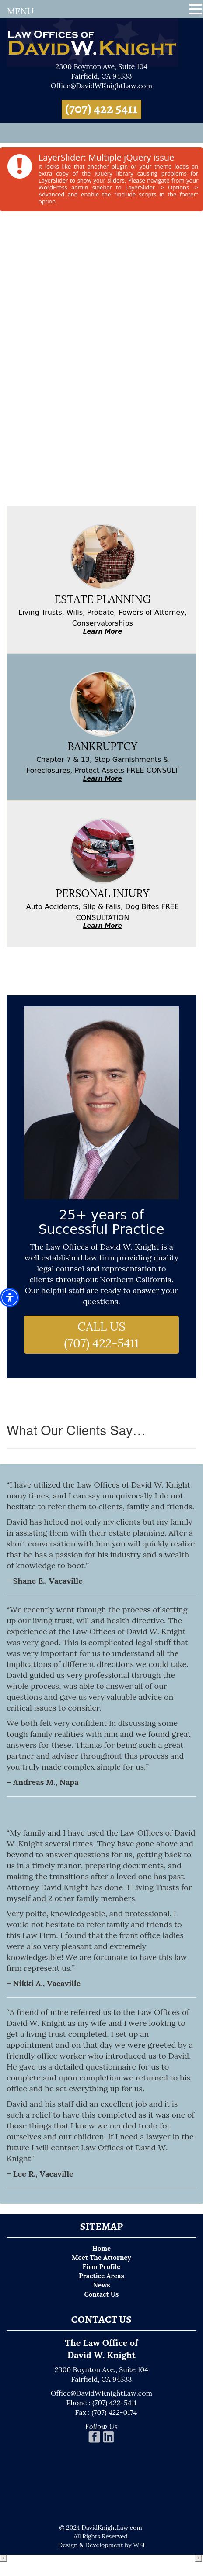 Knight & Knight Attorneys At Law - Fairfield CA Lawyers